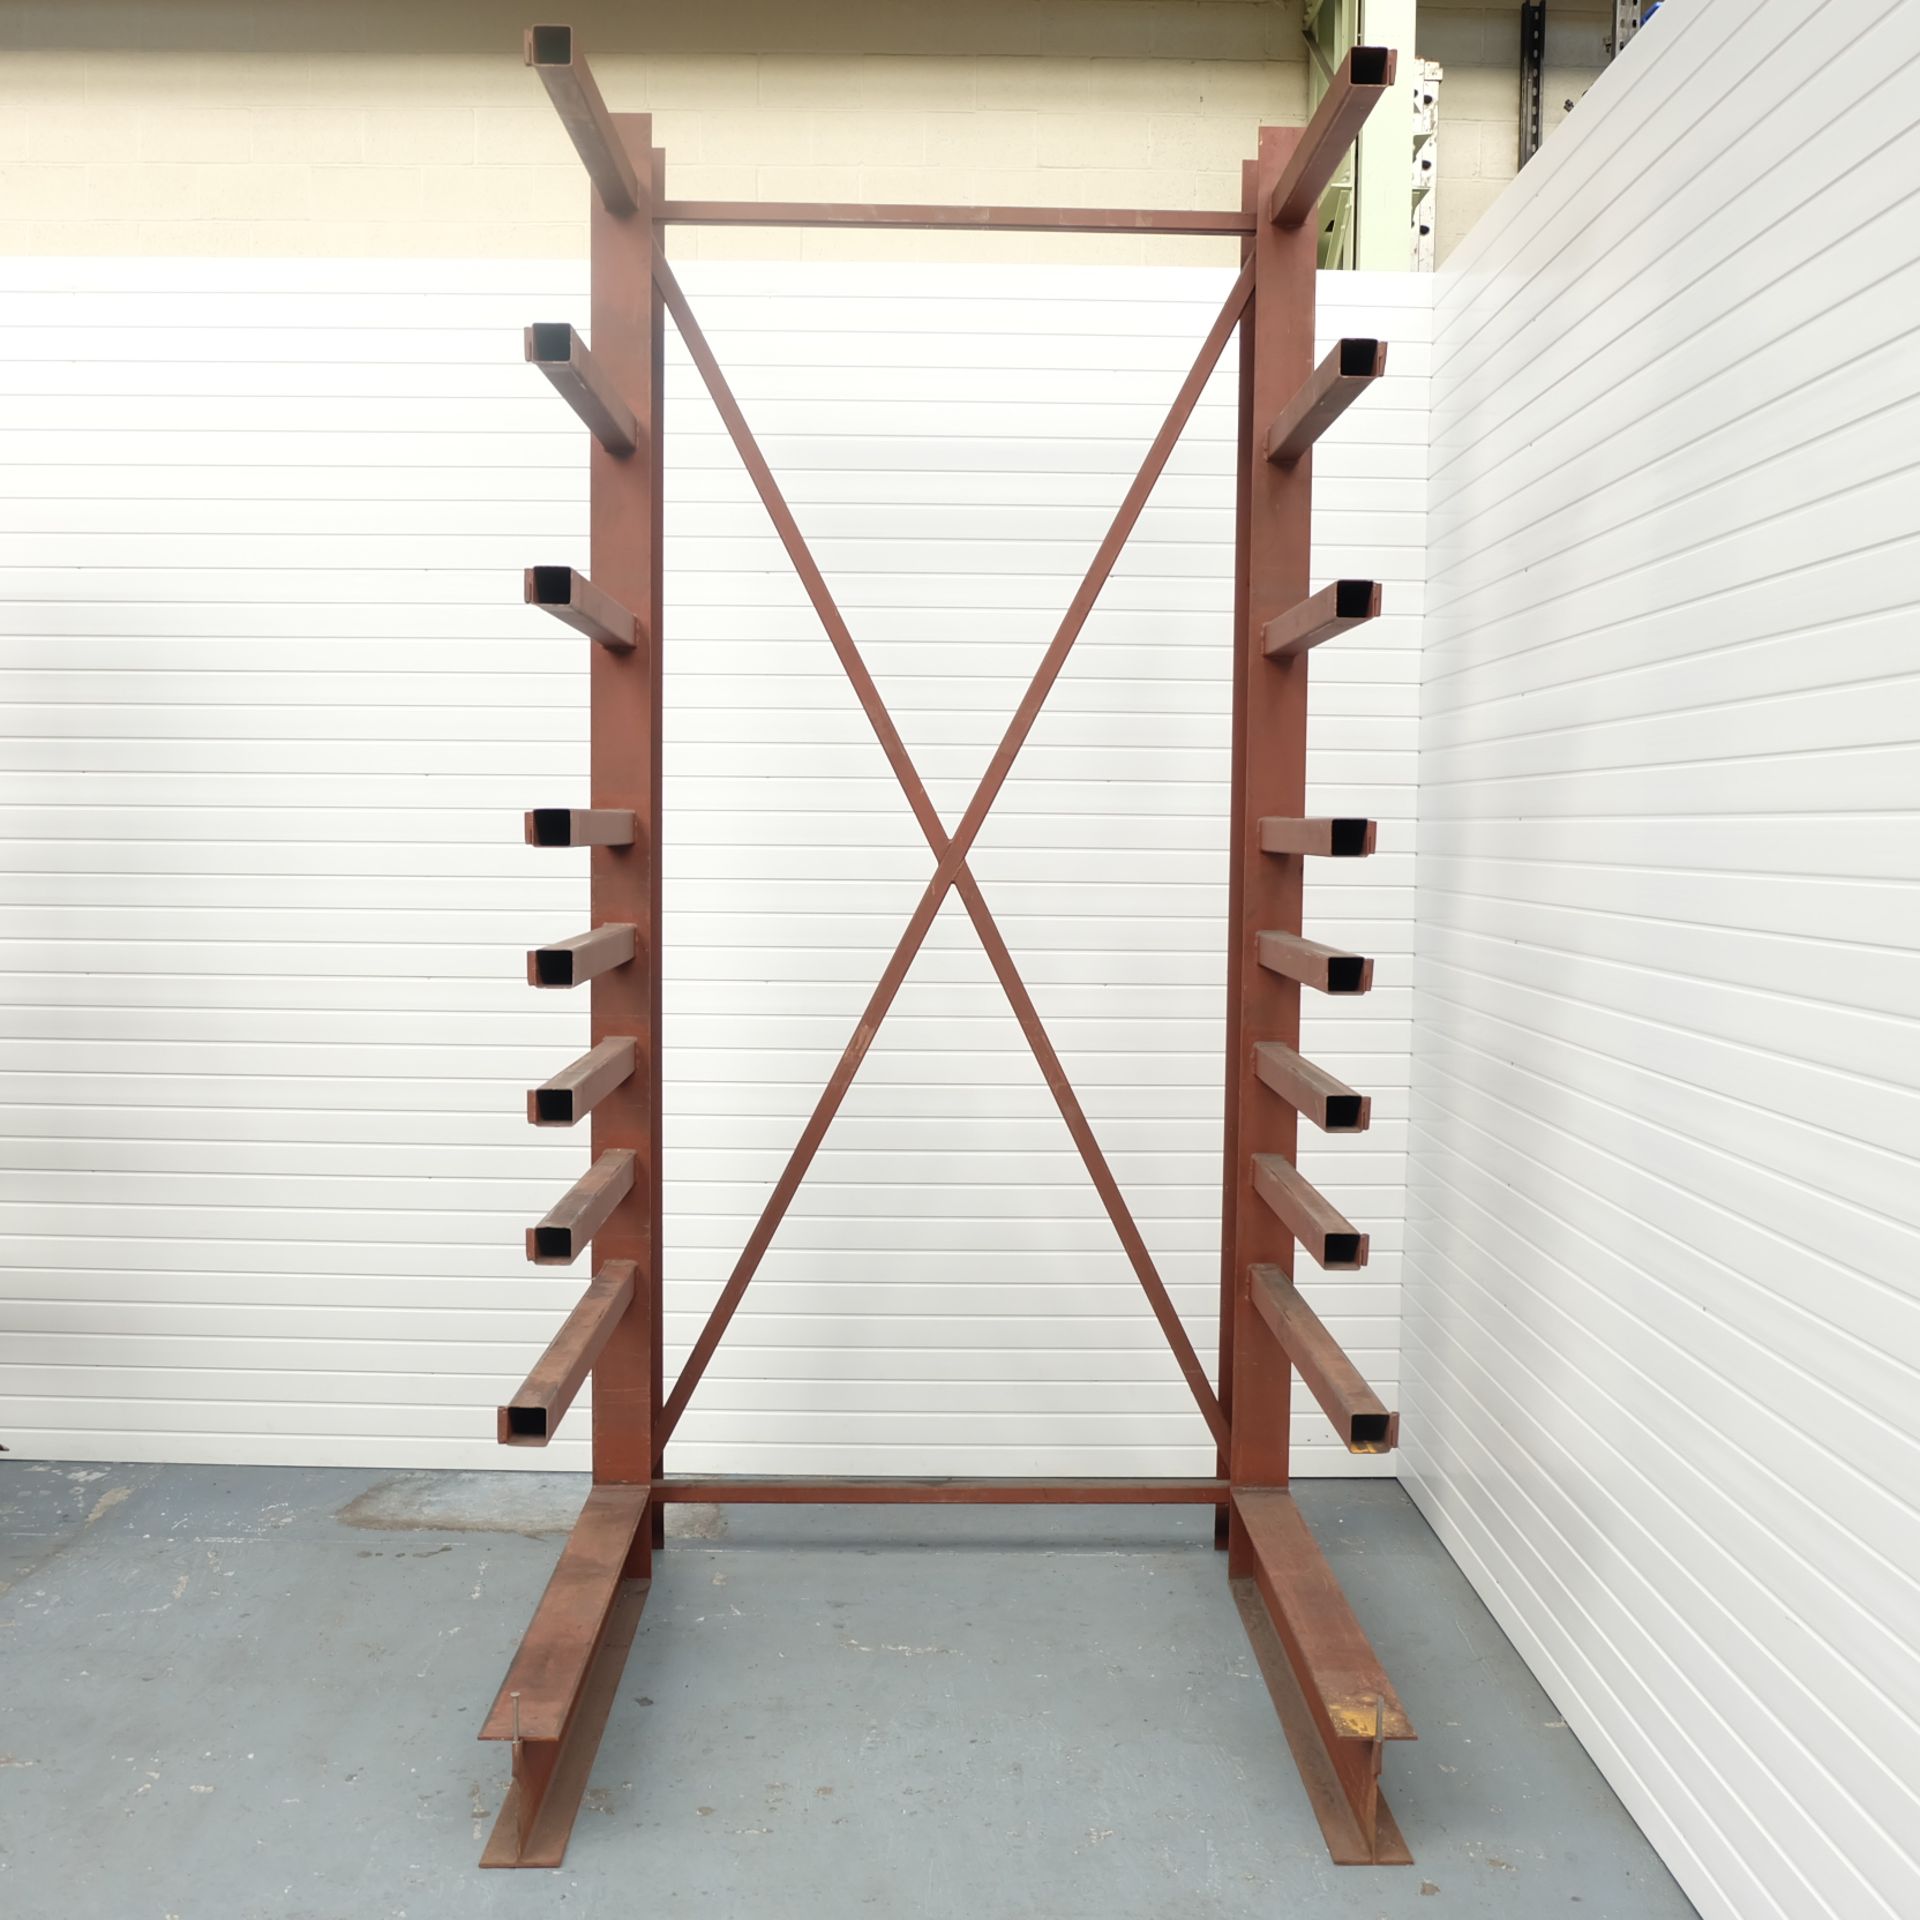 1 x Cantilever Sheet Stock Stand. 5' 10" x 5' 4" x 12' - Image 2 of 4